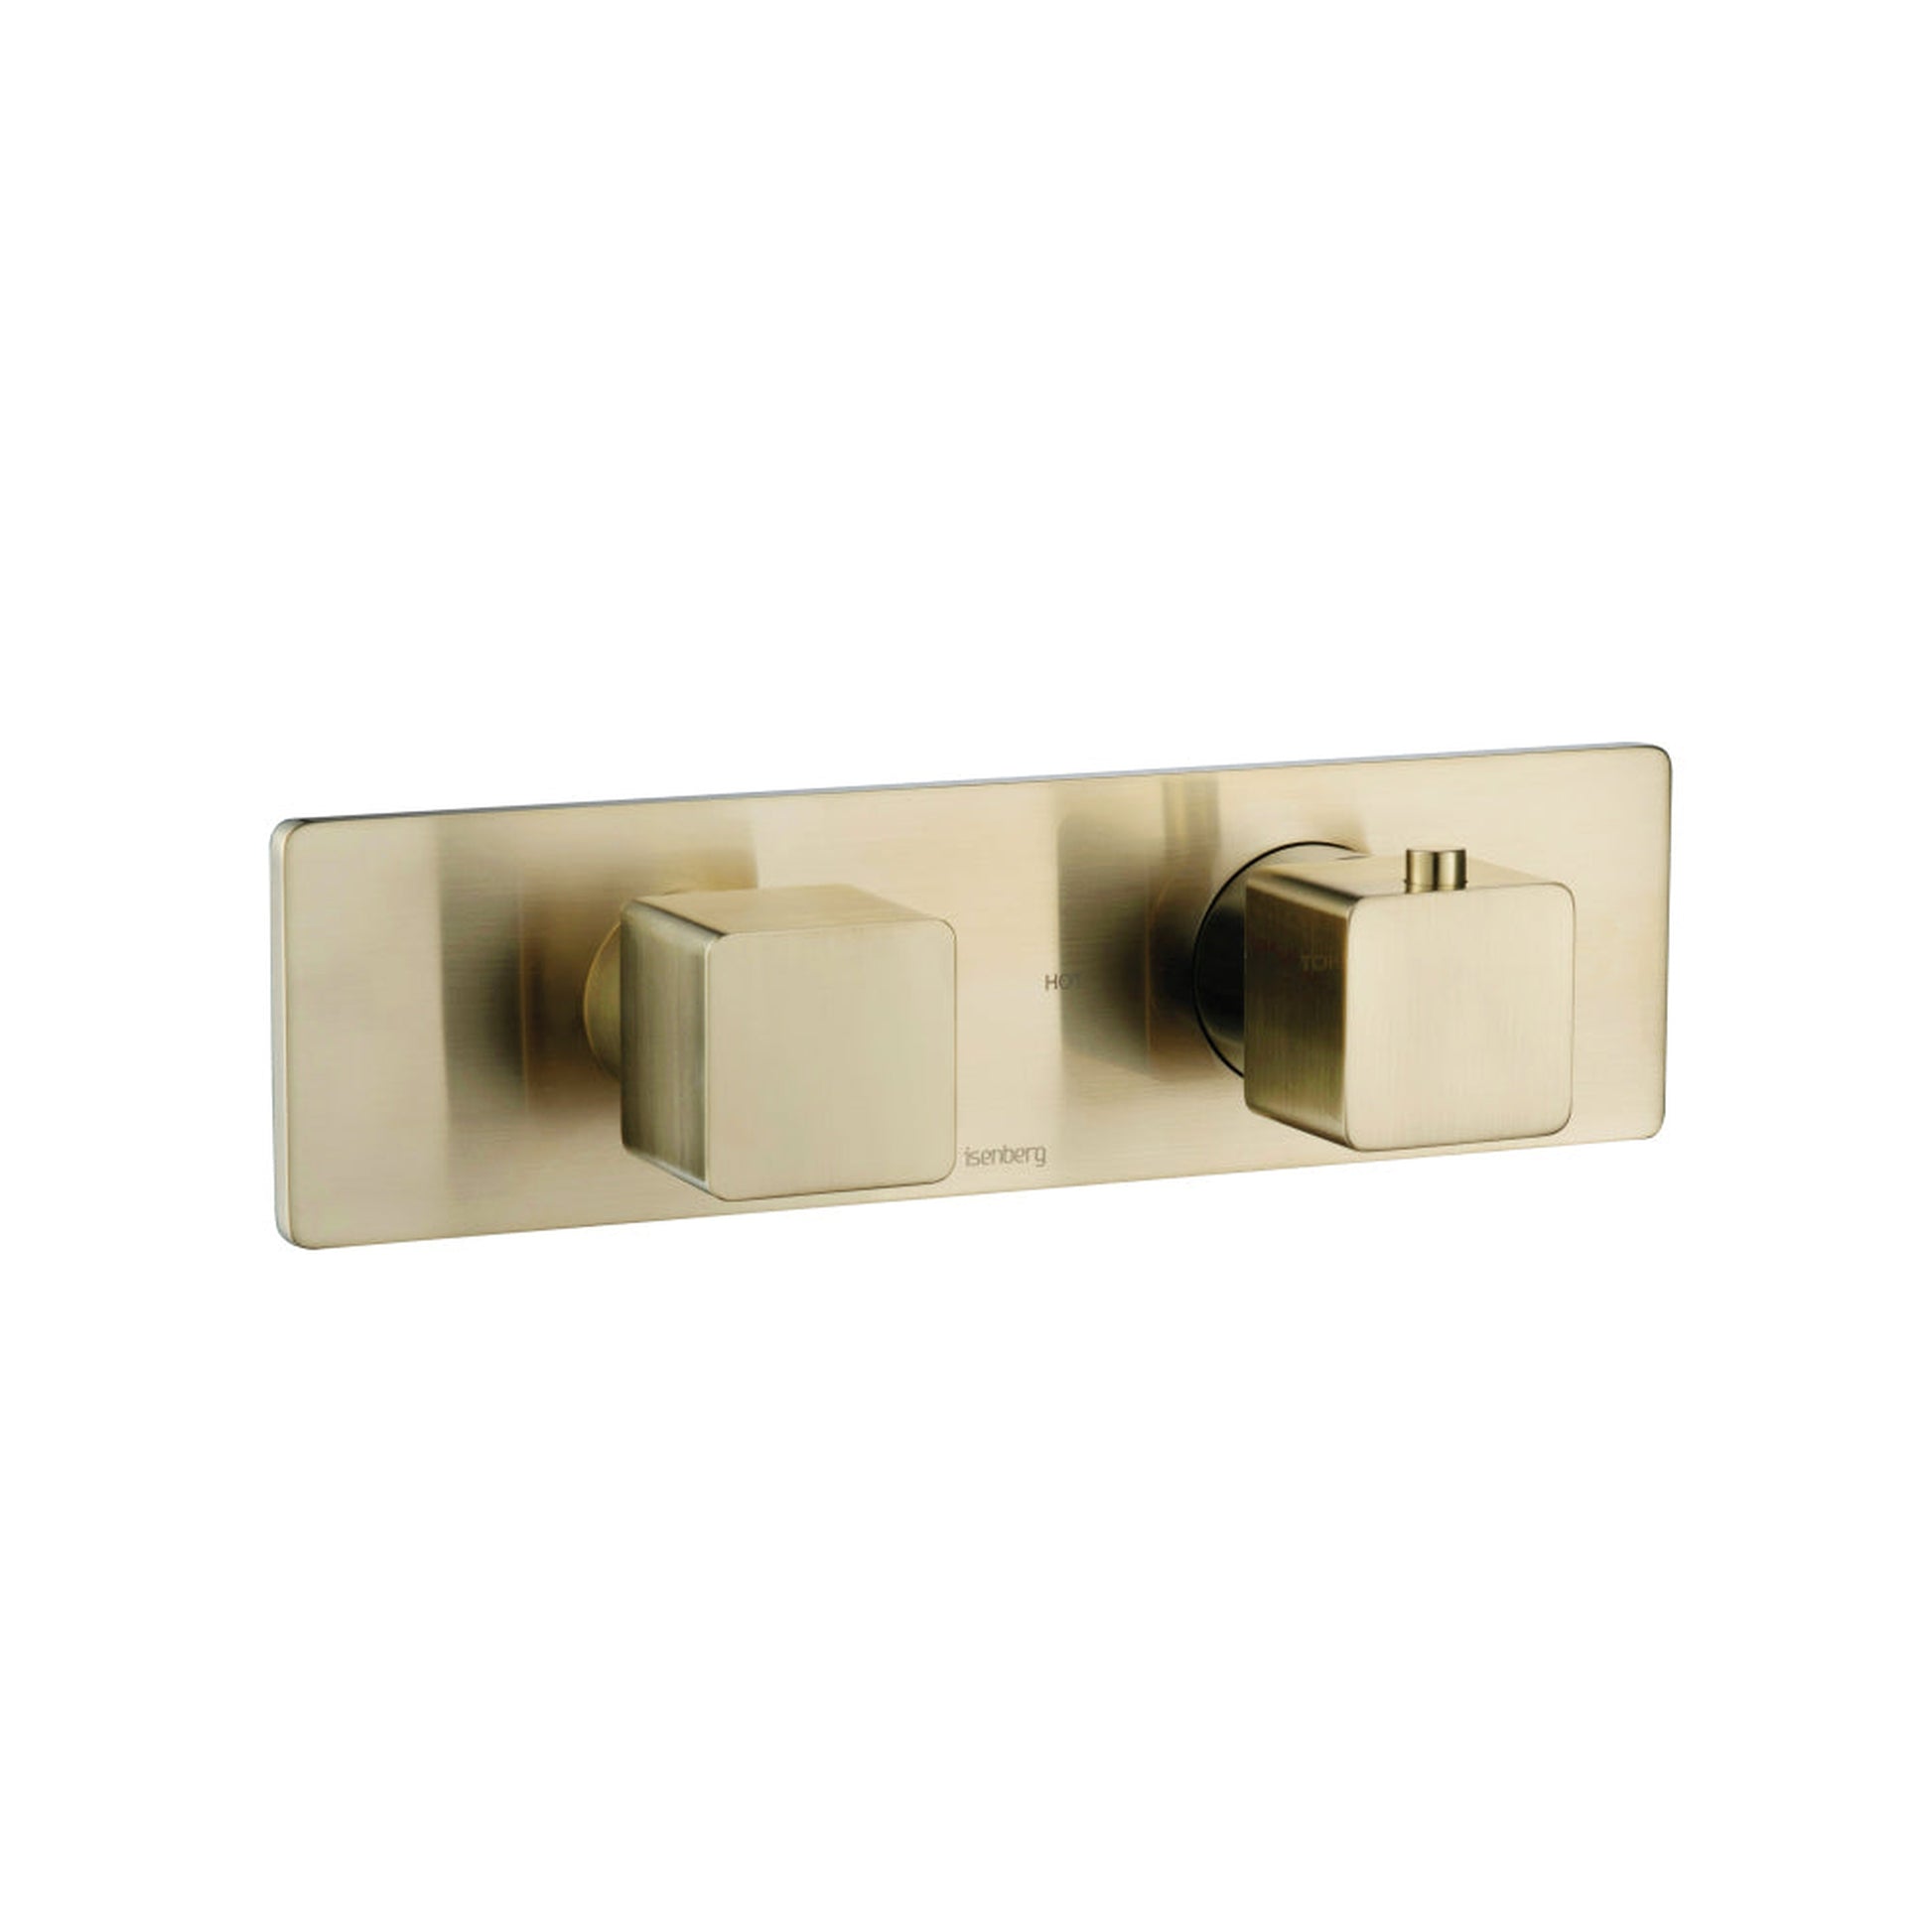 Isenberg Serie 196 Single Output Trim for Thermostatic Valve in Satin Brass